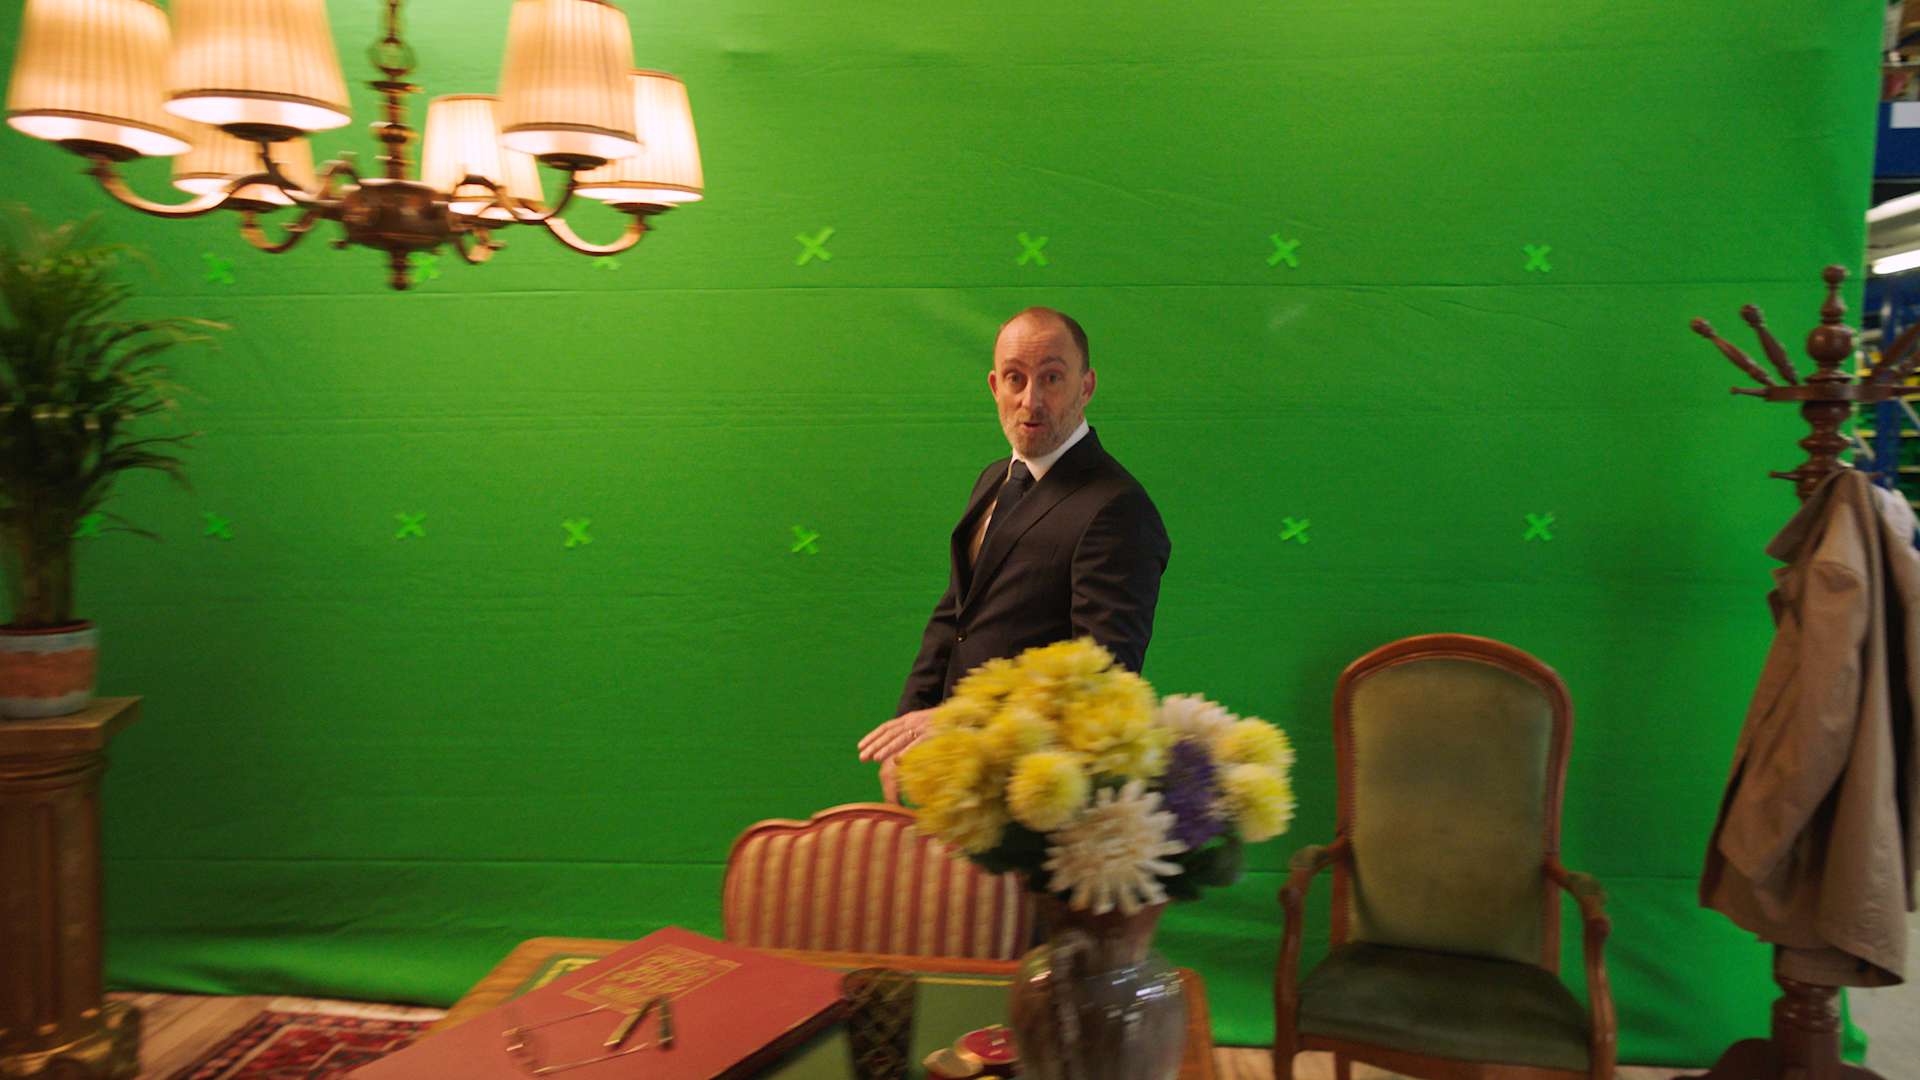 The main actor of the bank avera commercial walking infront of a empty greenscreen.